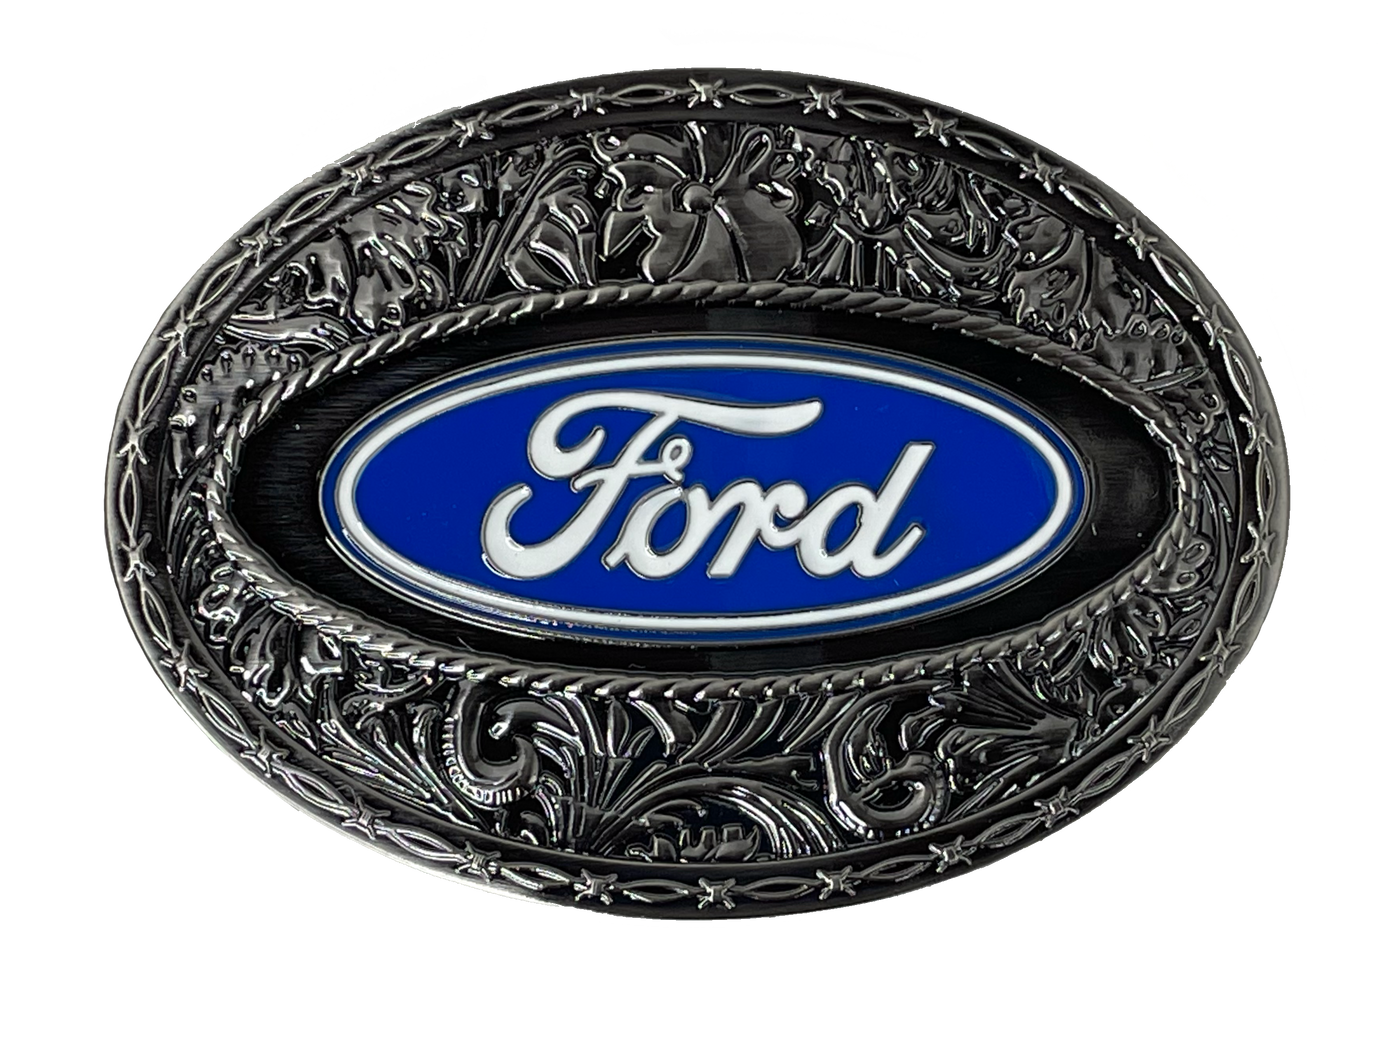 Western Ford Logo Buckle features a western oval buckle with blue enamel background with white enamel trim and "Ford" in white enamel script. Fits belts up to 1-3/4" wide Available at our shop just outside Nashville in Smyrna, TN.